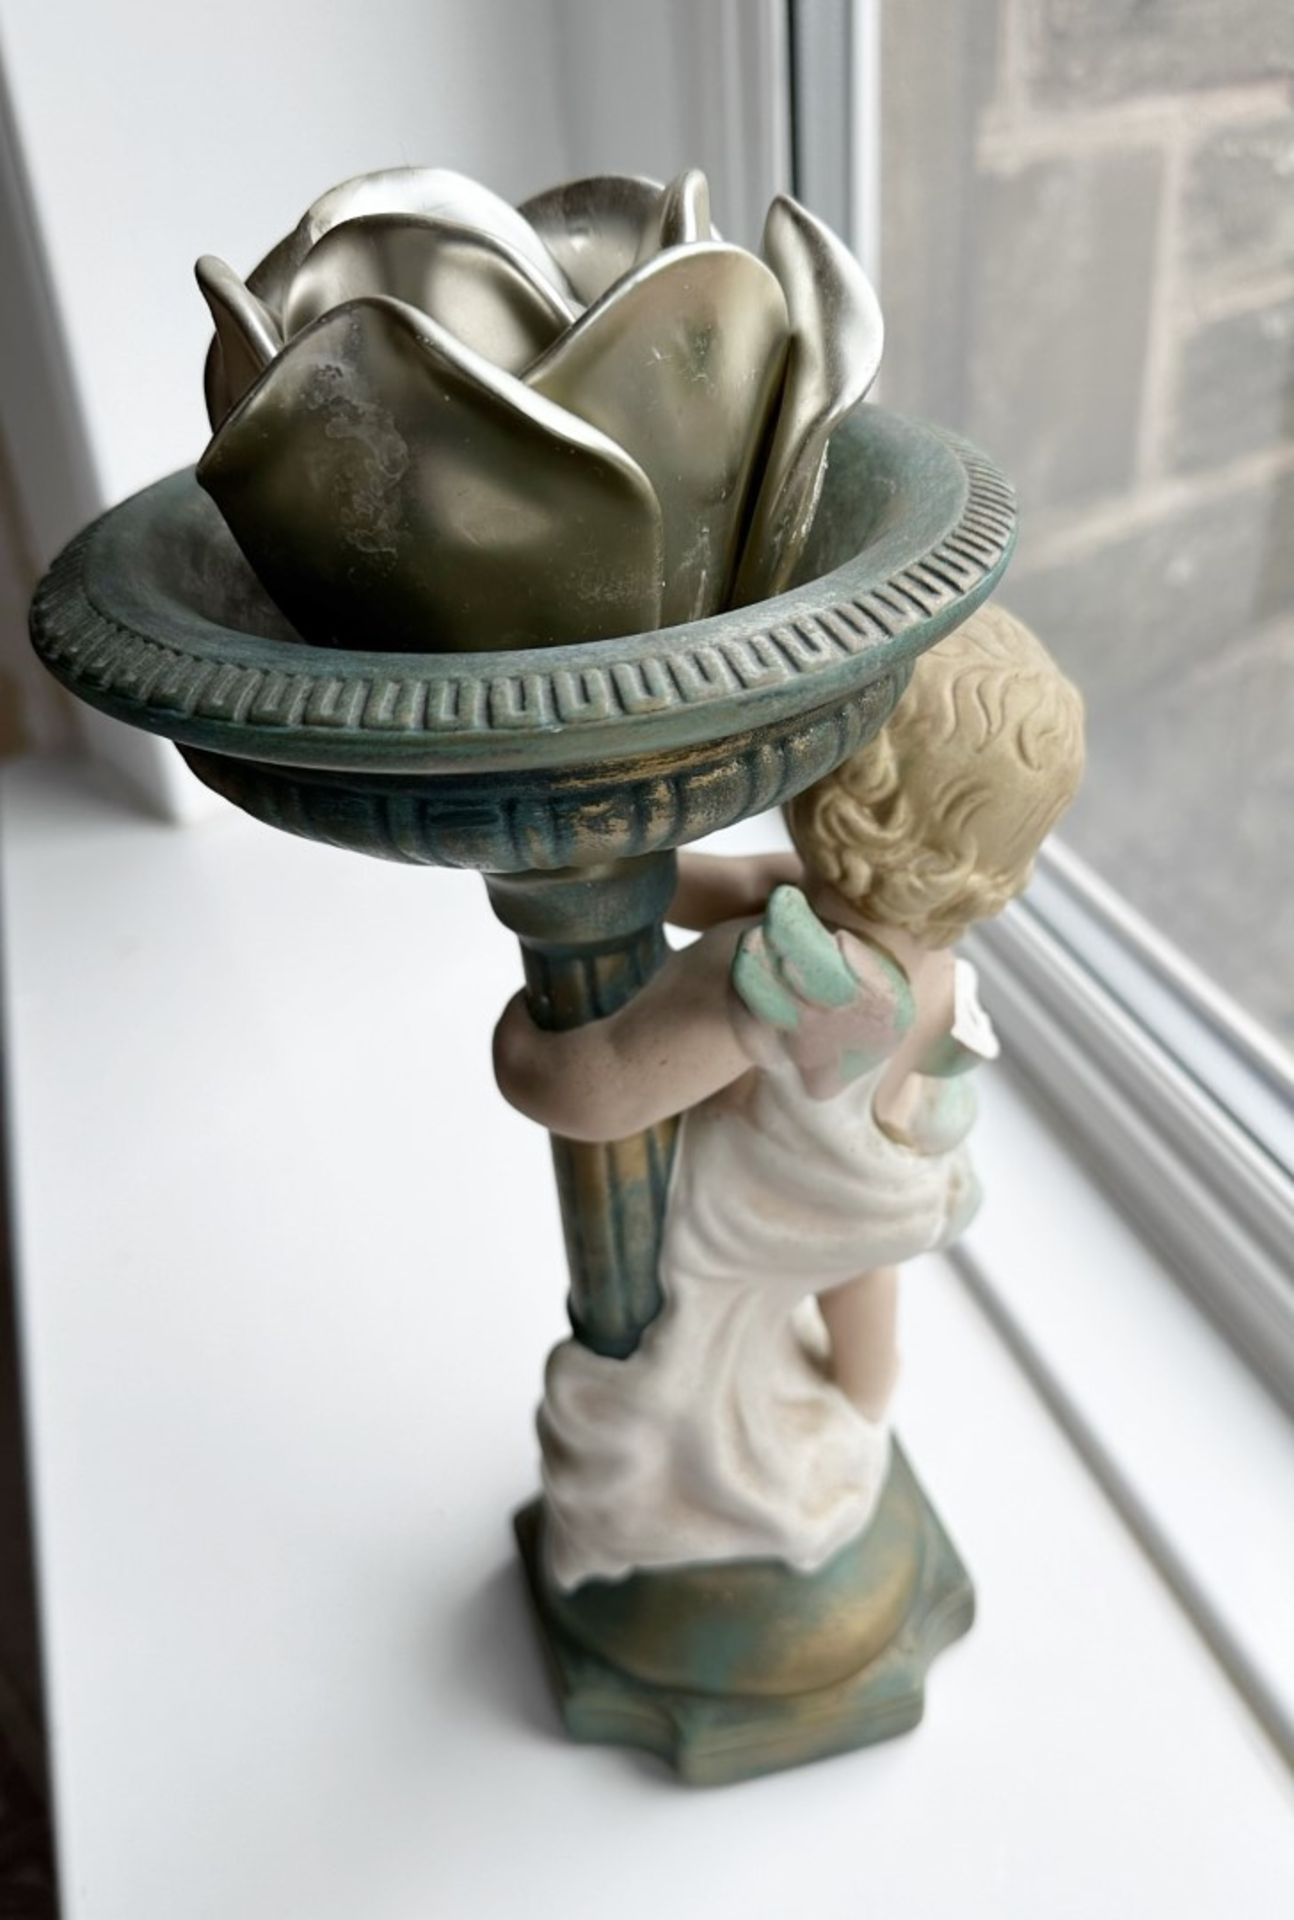 2 x Vintage French Porcelain Cherub Candle Holders - Image 9 of 9